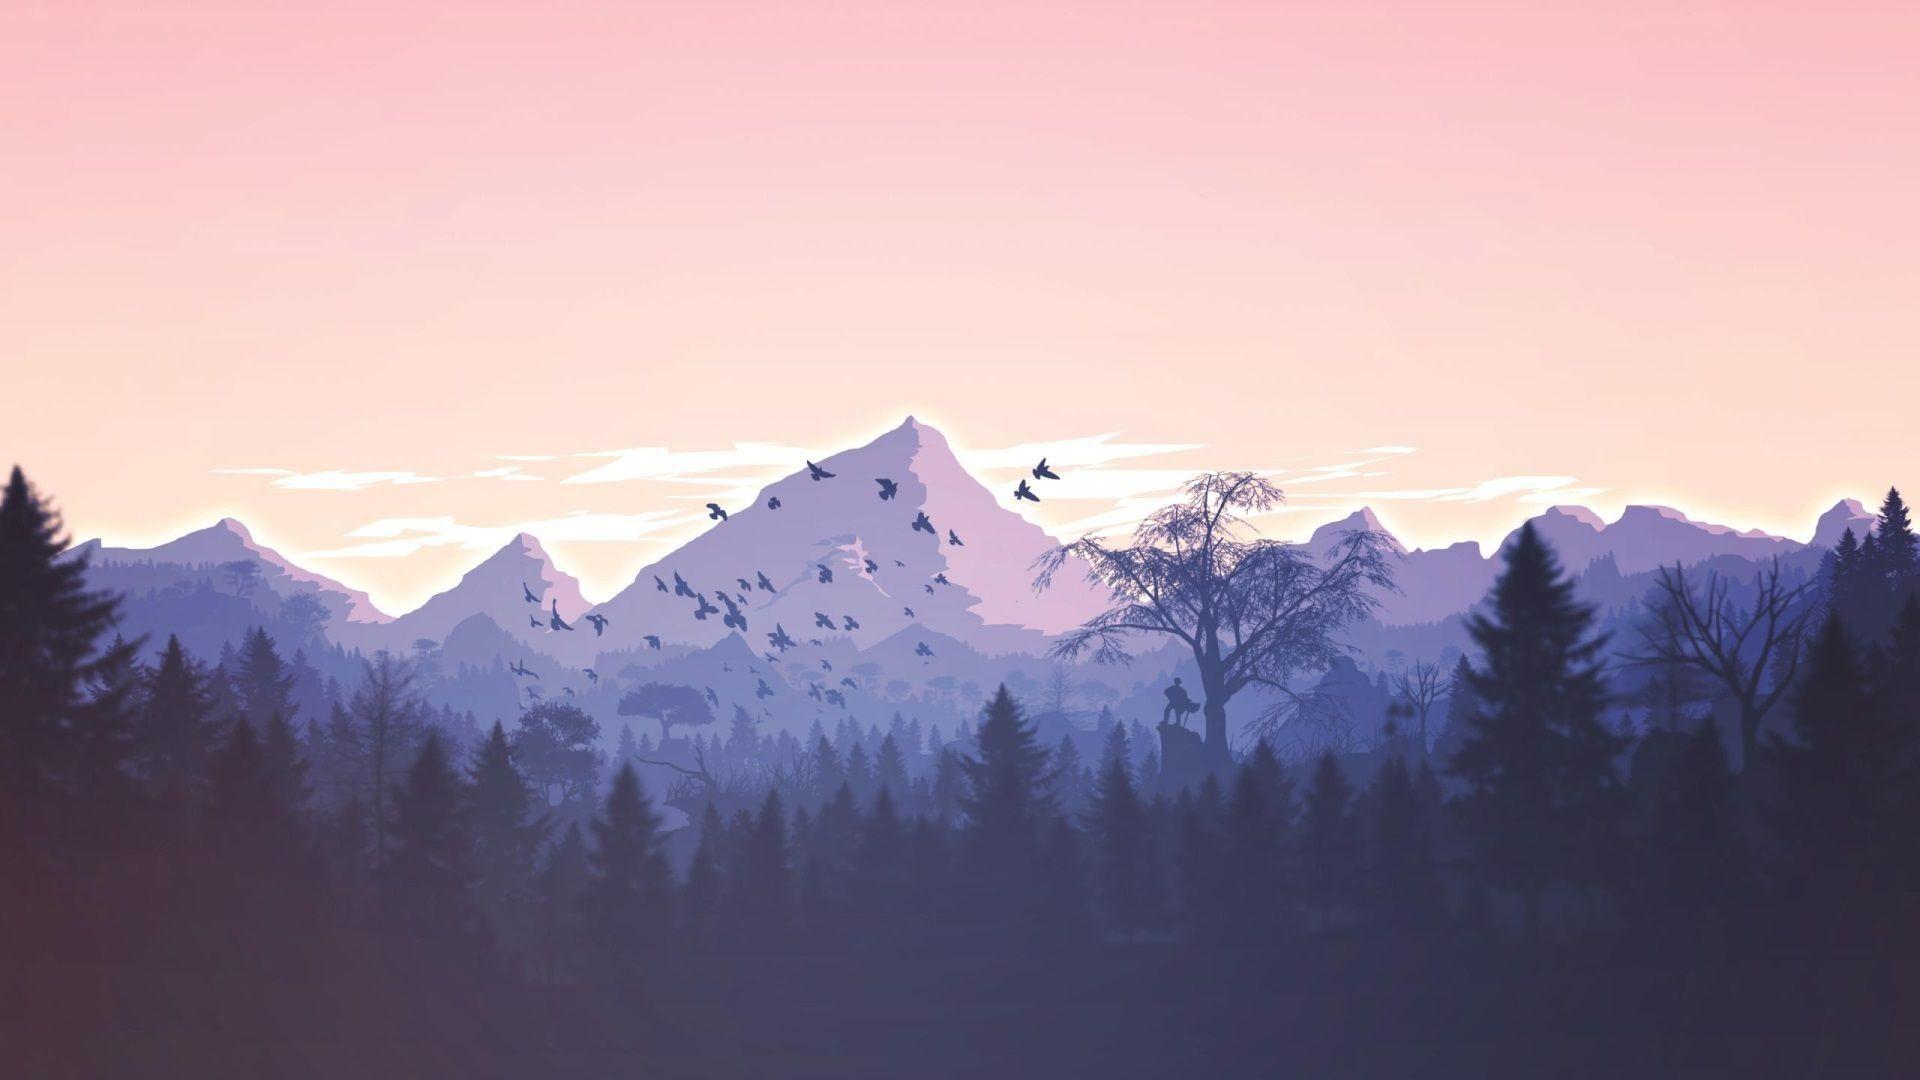 A pink and purple sunset over a mountain range with trees in the foreground. - 1920x1080